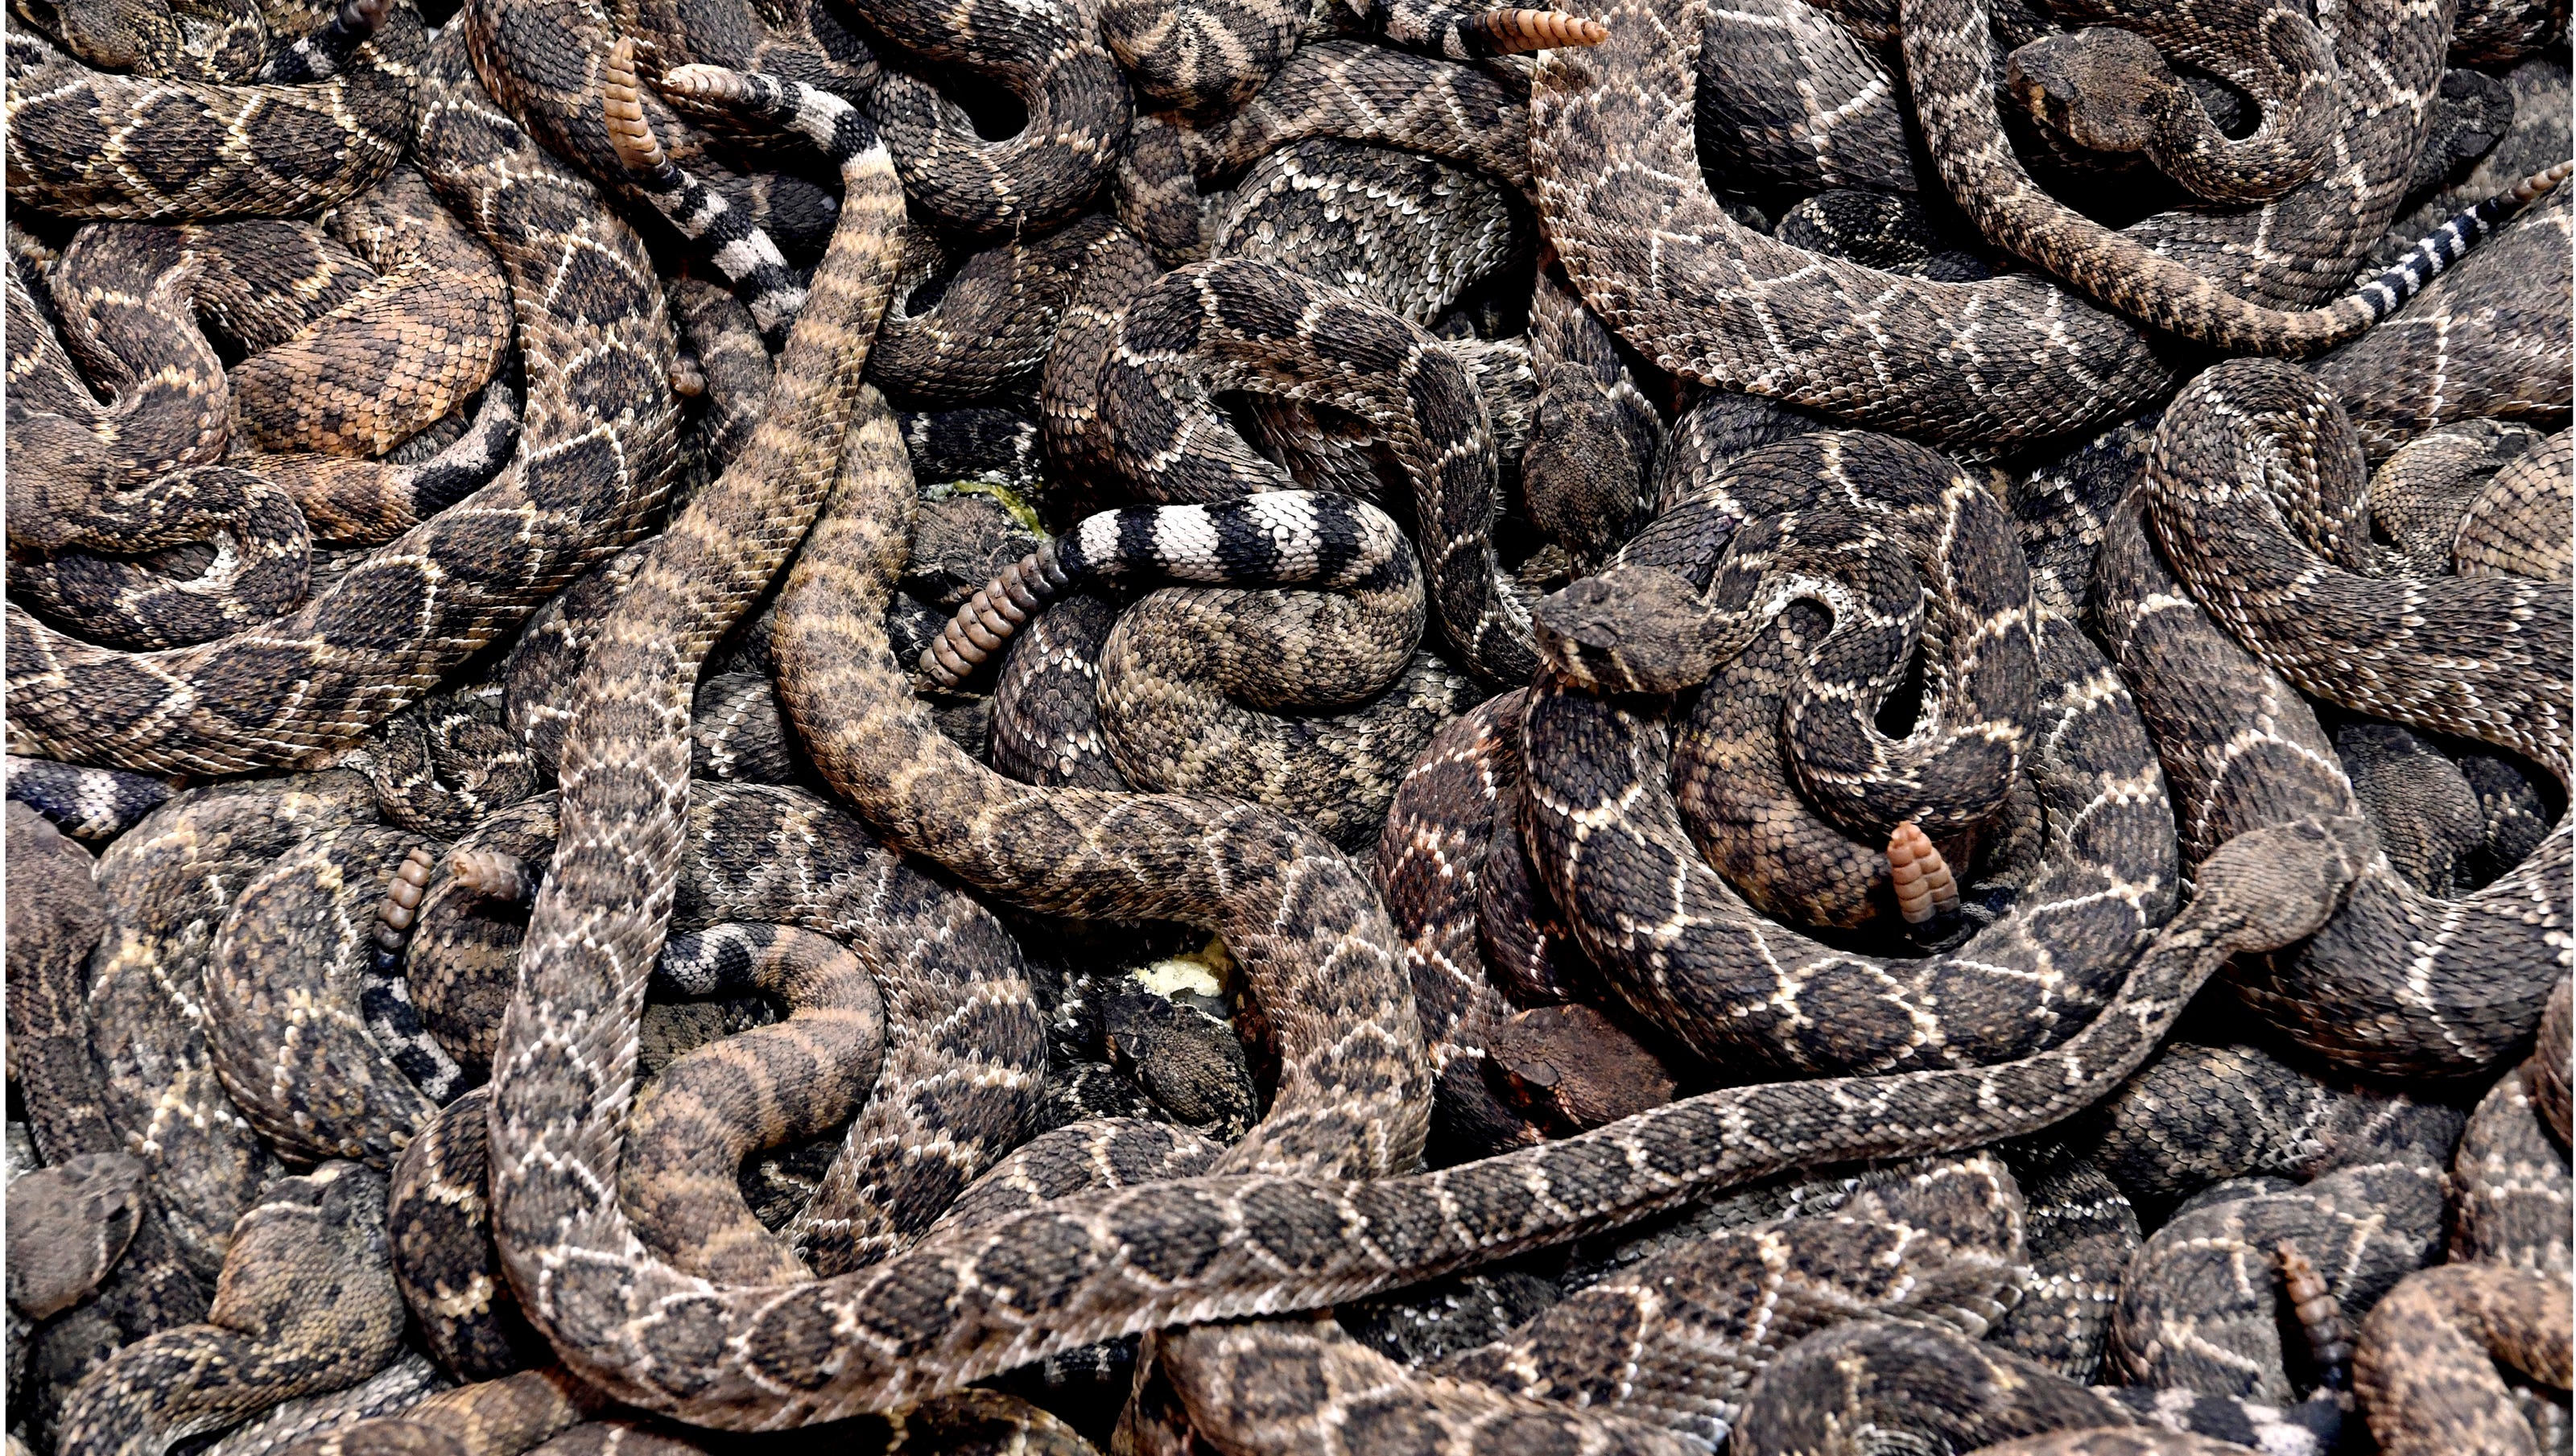 Scenes from the 60th World's Largest Rattlesnake Roundup